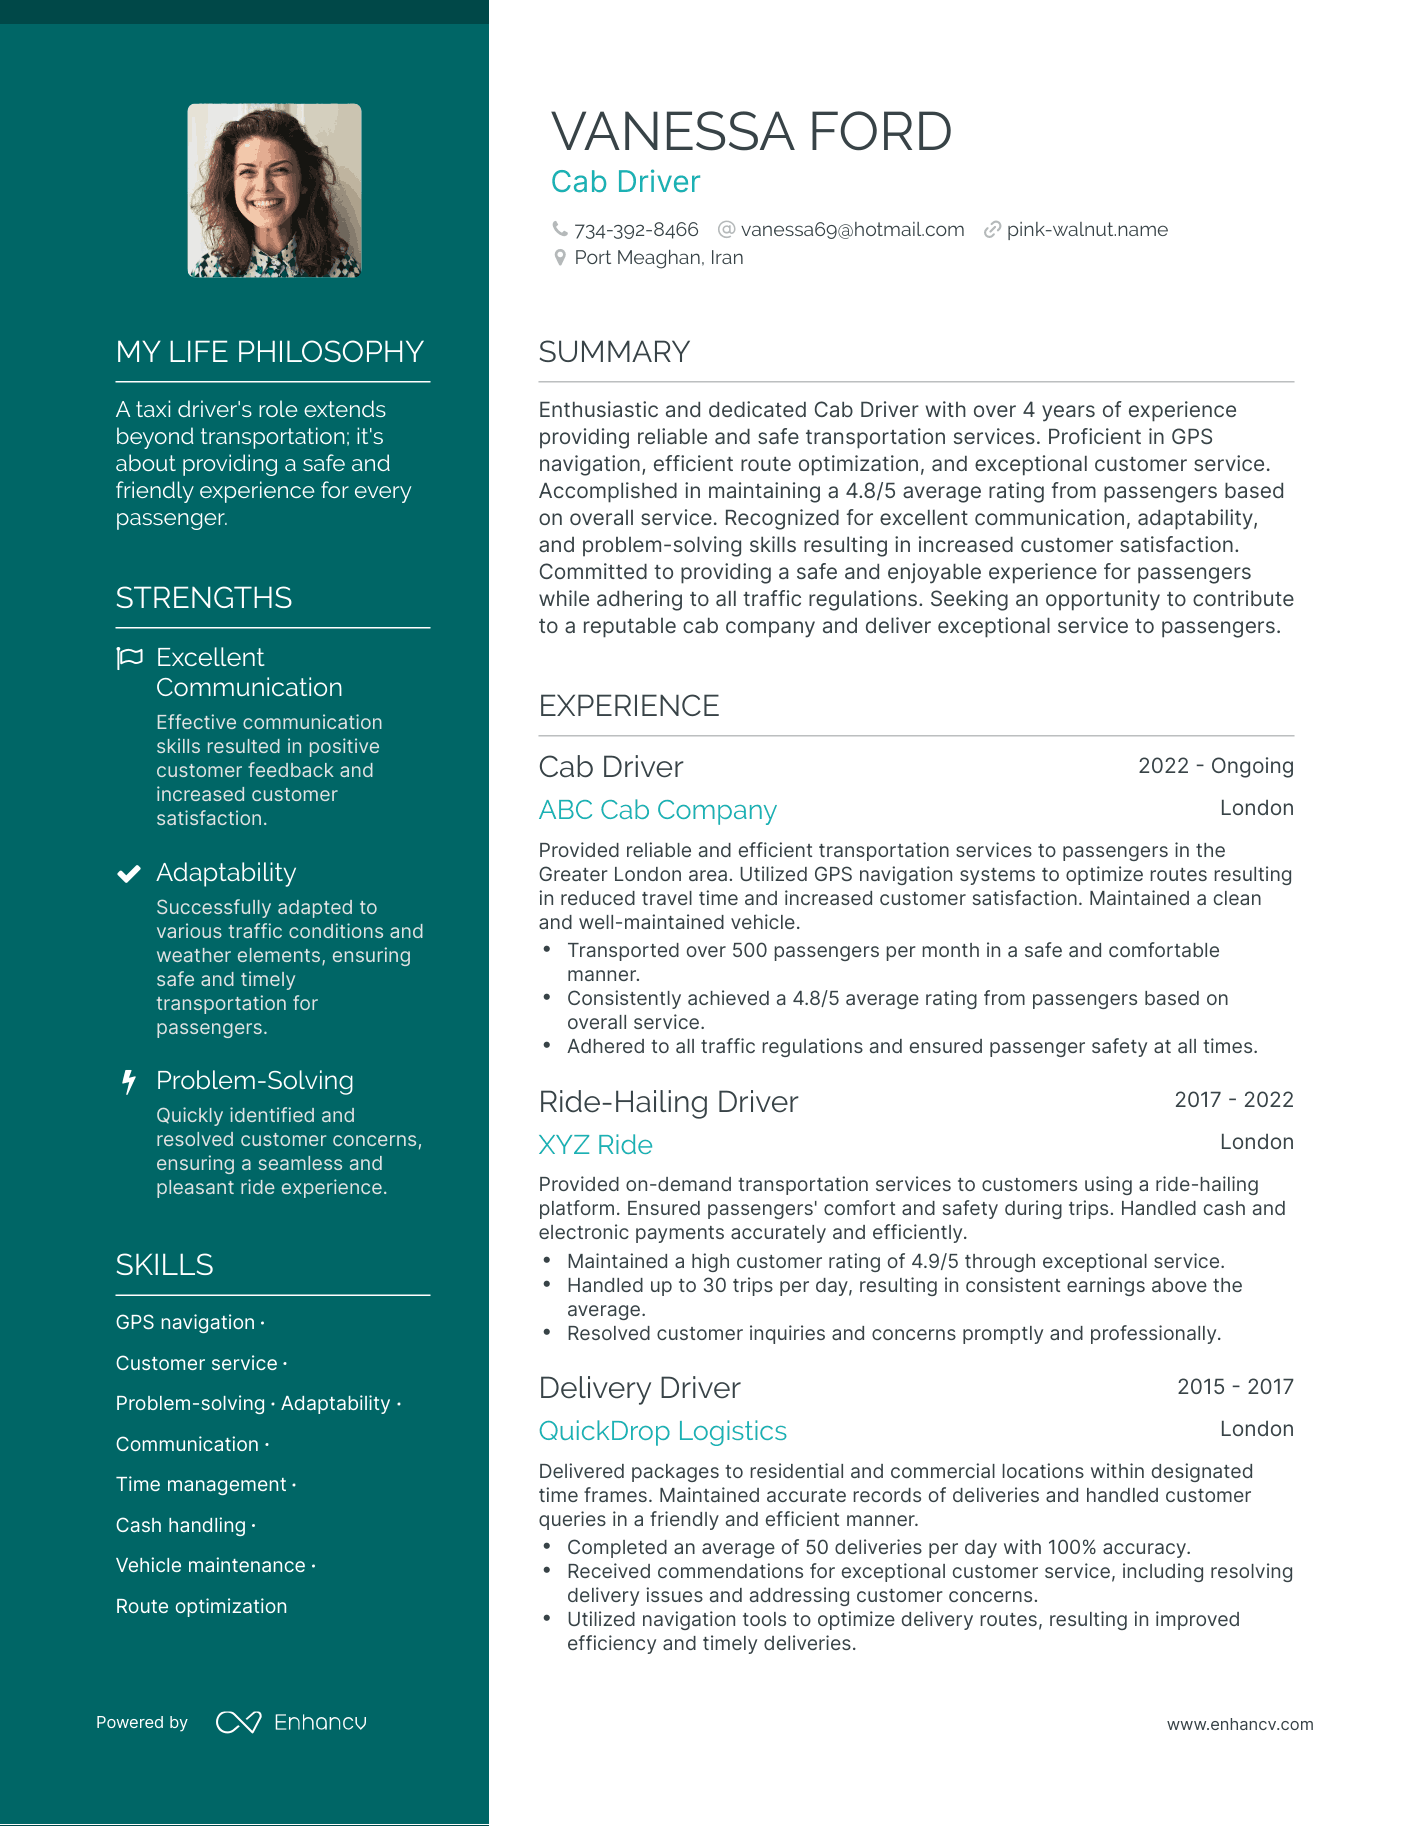 Cab Driver resume example